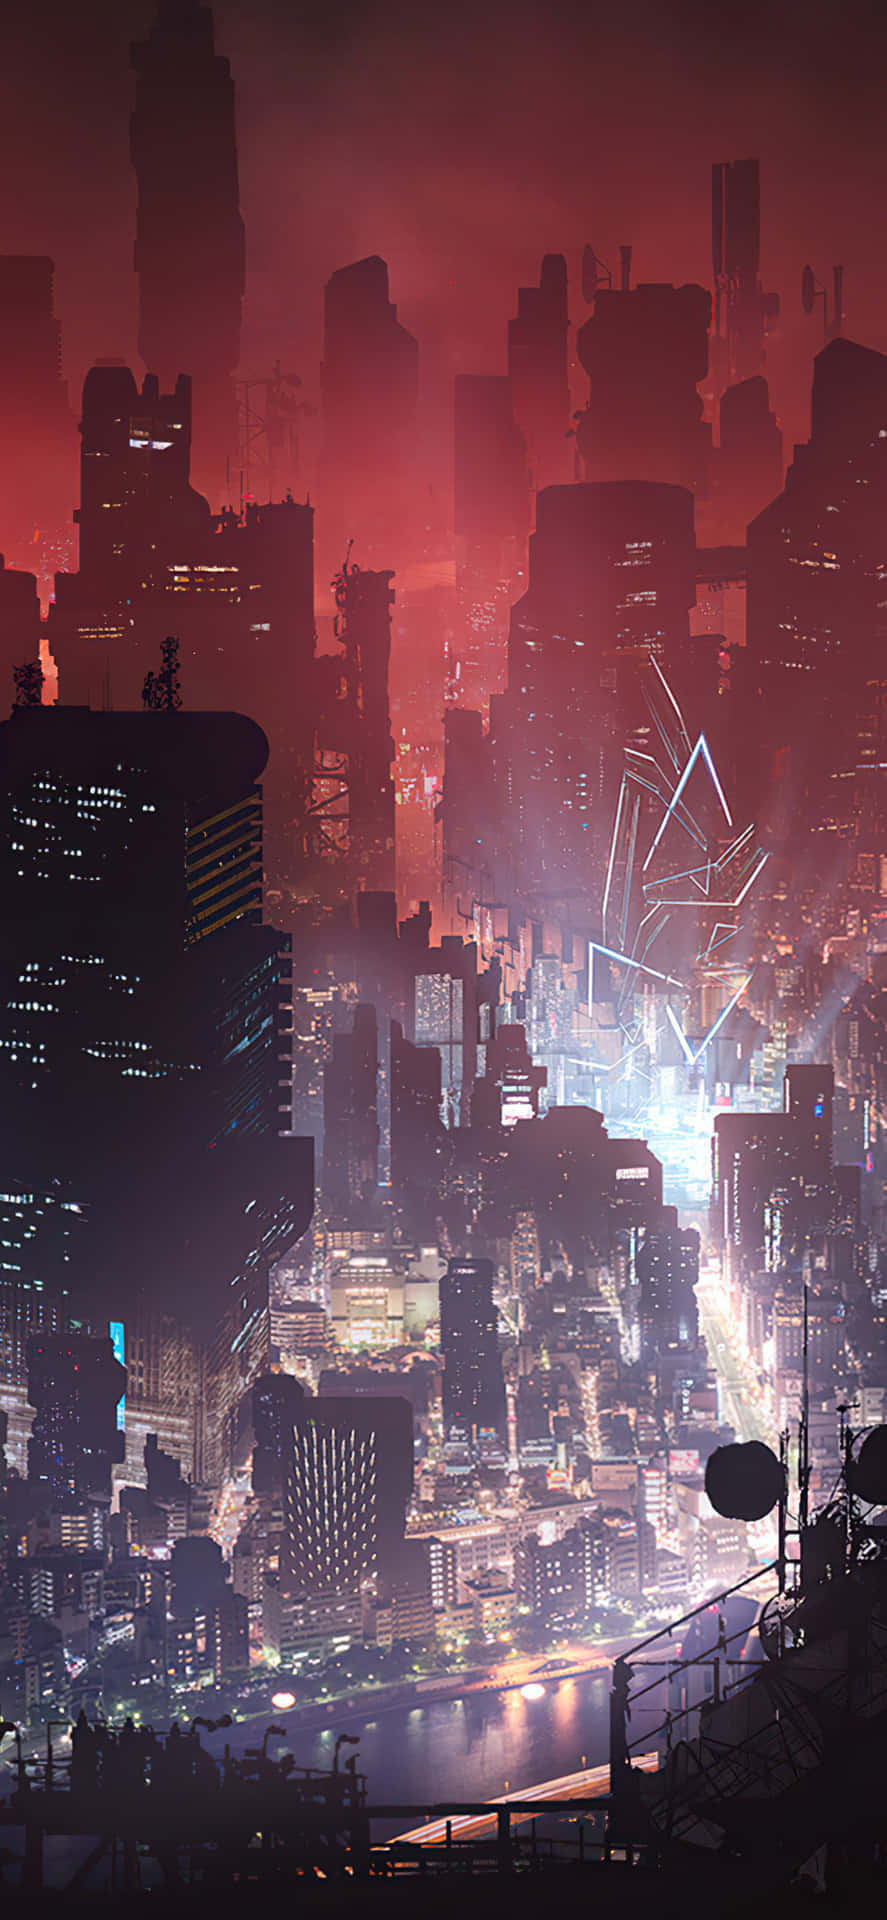 "Explore the vibrant and cutting-edge nightlife of Cyberpunk Night City!" Wallpaper